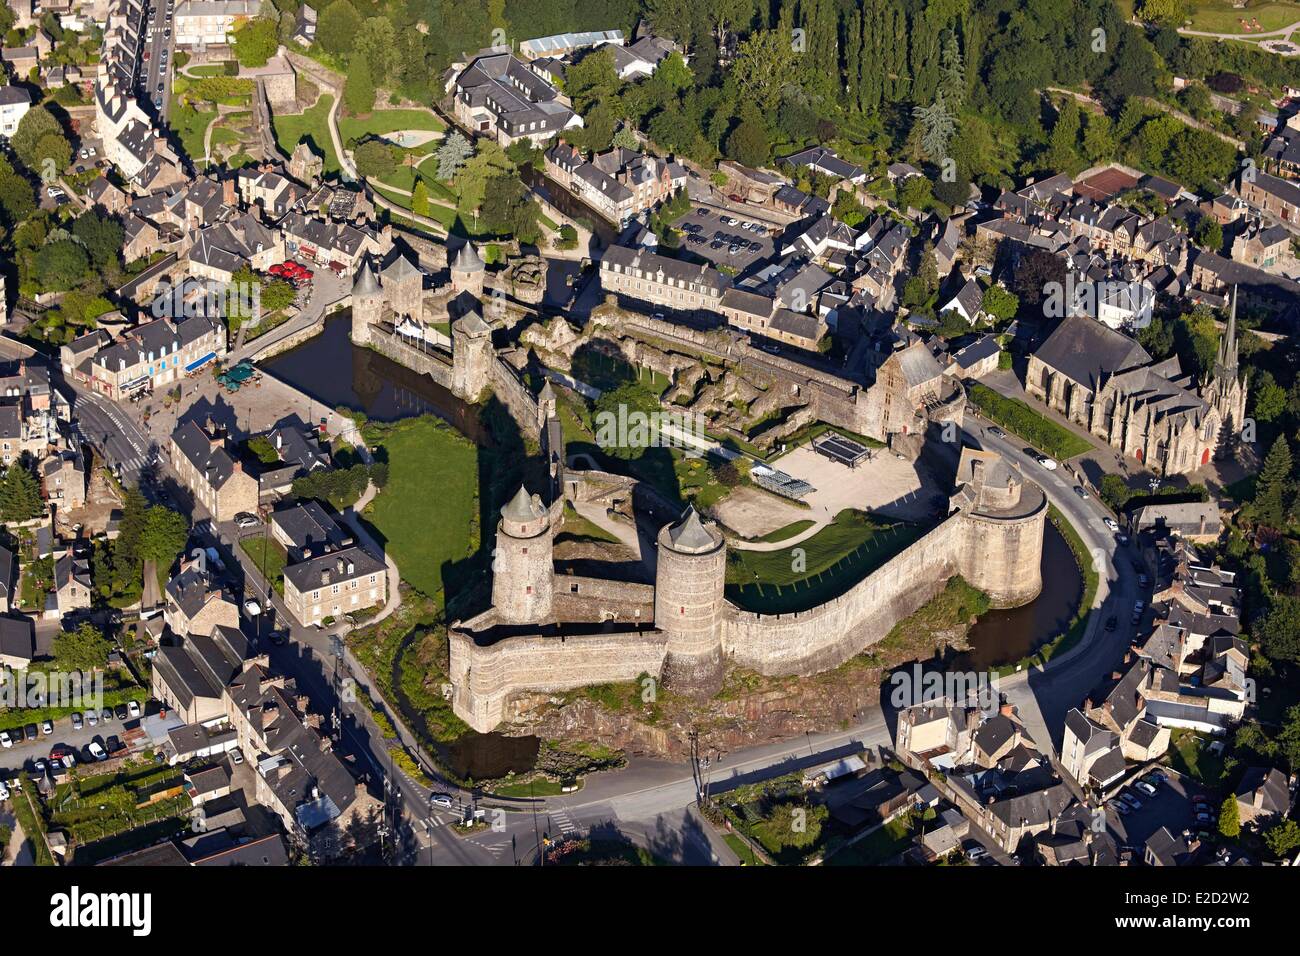 France Ille Et Vilaine Fougeres The Chateau De Fougeres One Of The Greatest French Castle Aerial View Stock Photo Alamy